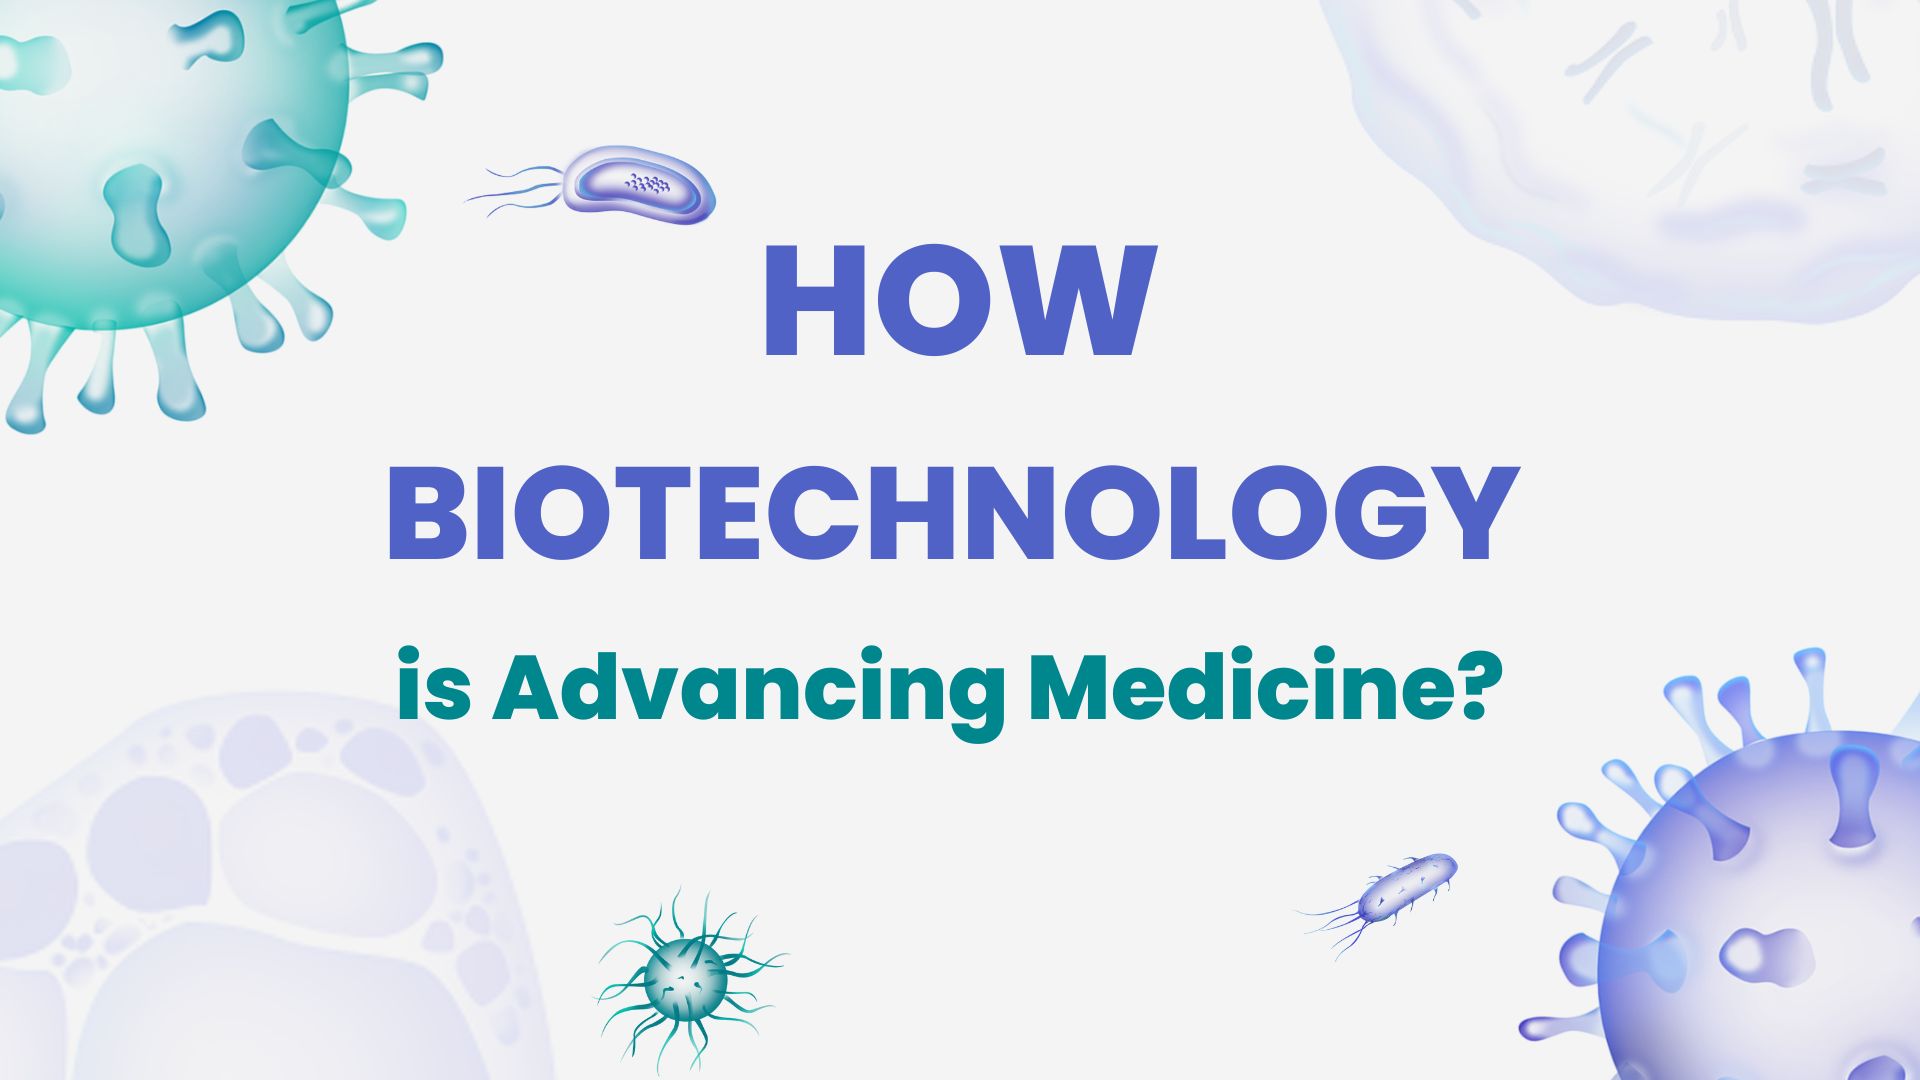 How Biotechnology is Advancing Medicine?